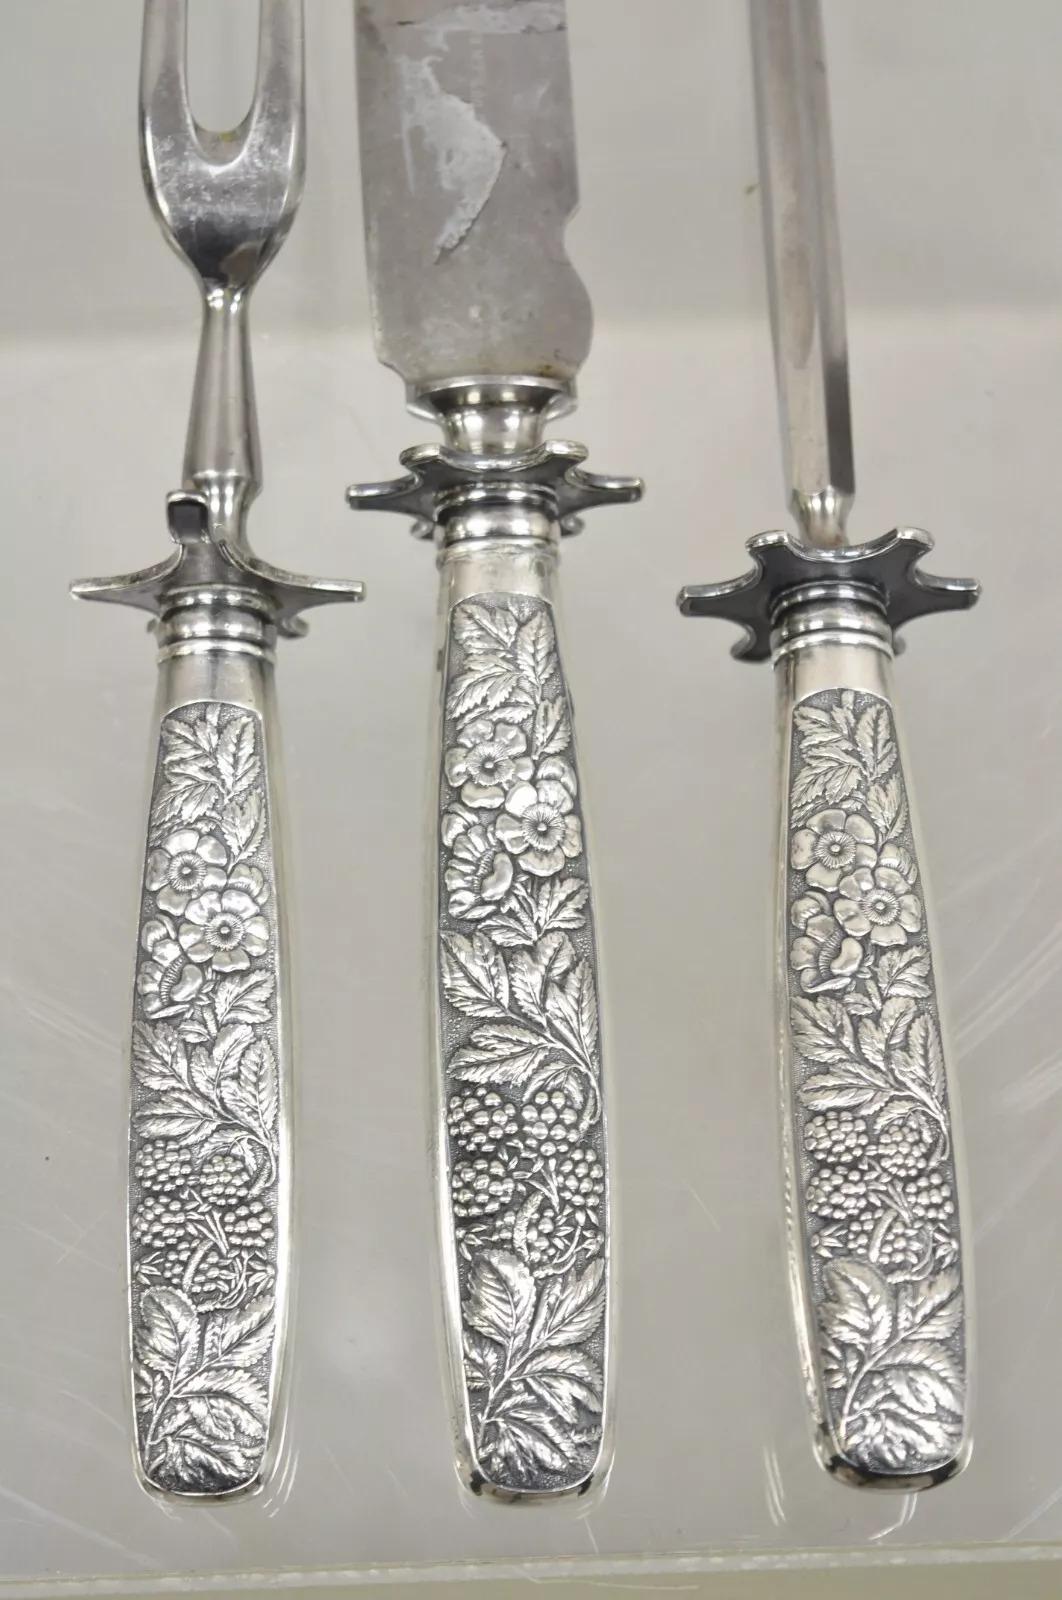 Antique R Wallace & Sons Victorian Repousse Meat Carving Set - 3 Pc Set (Knife, Fork, Sharpener)  Circa Early to Mid 20th Century.
Mesures :  
Couteau : 15